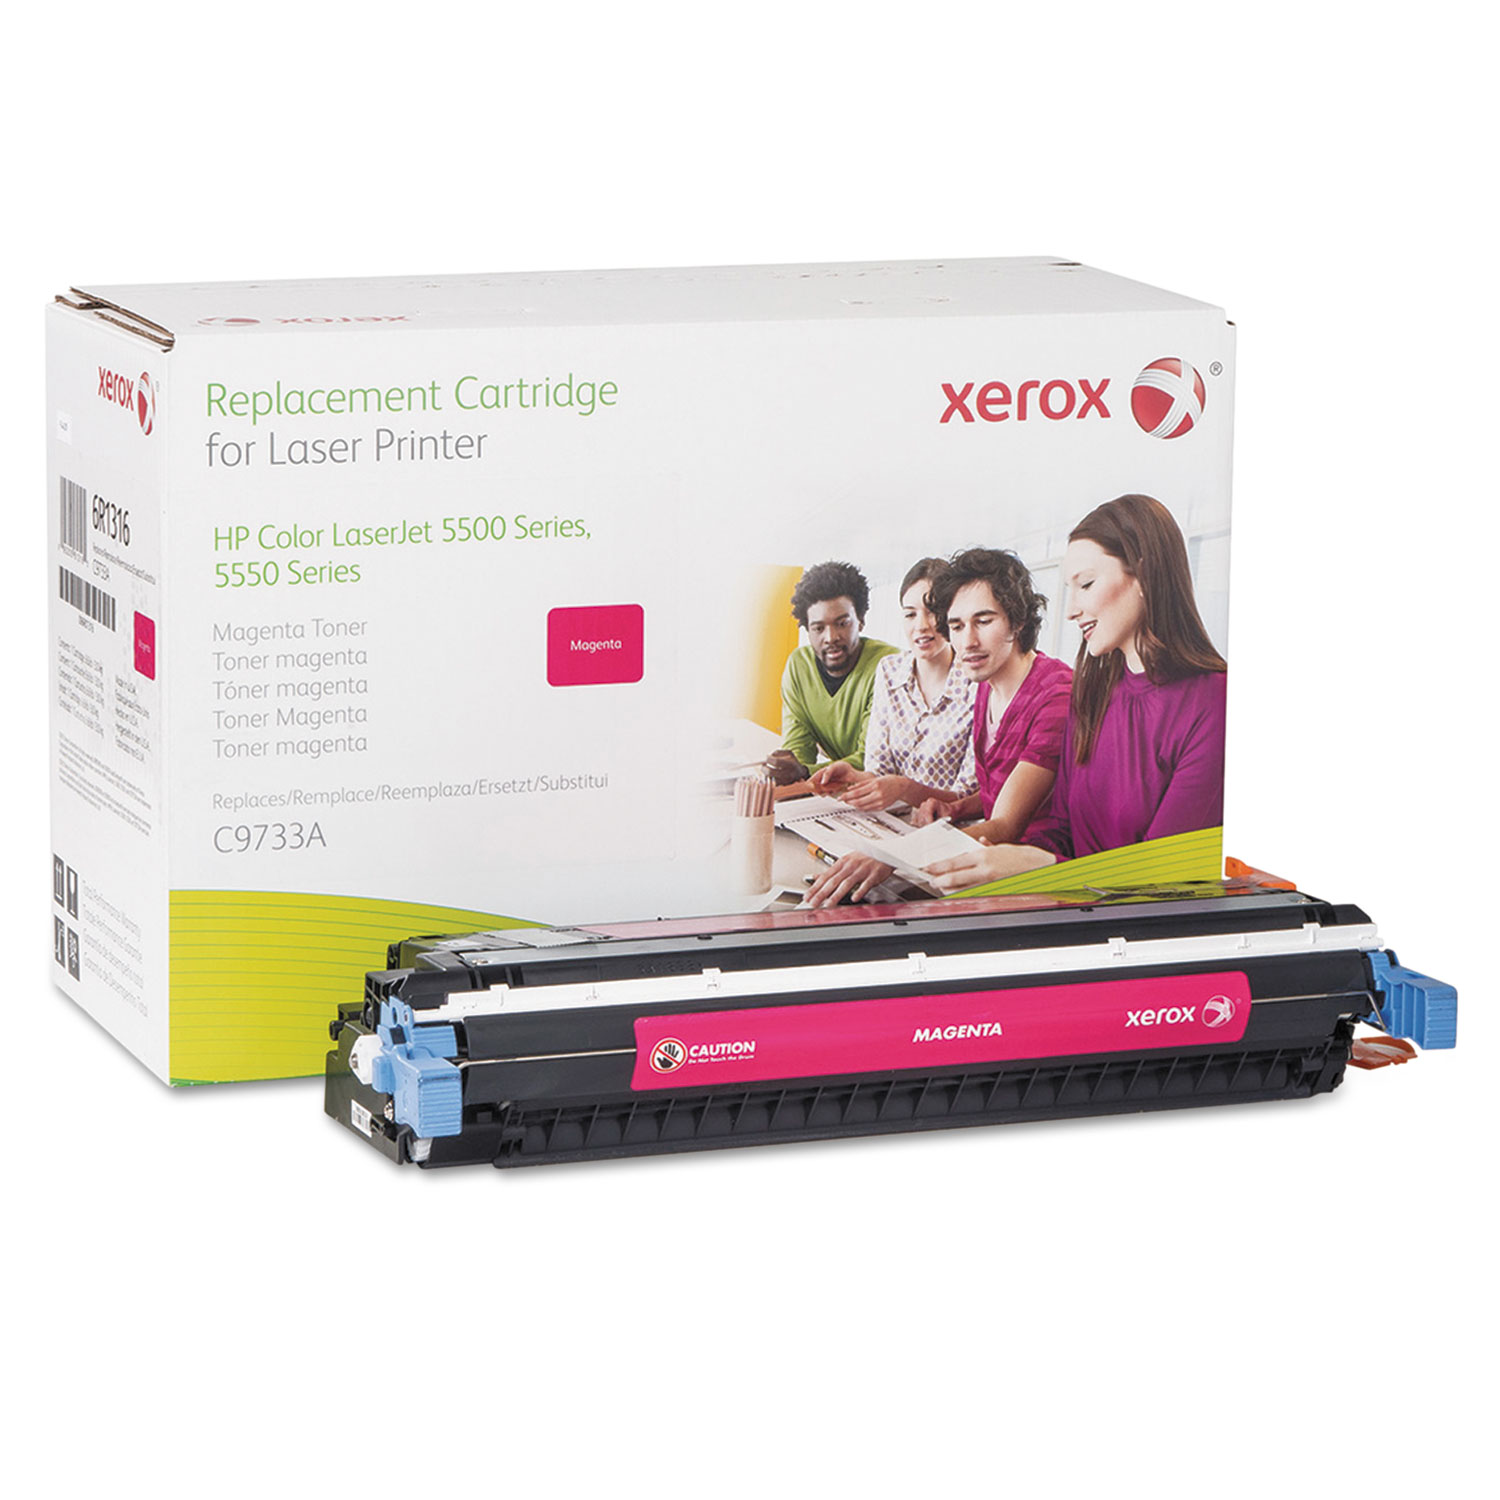  Xerox 006R01316 006R01316 Replacement Toner for C9733A (645A), Magenta (XER006R01316) 